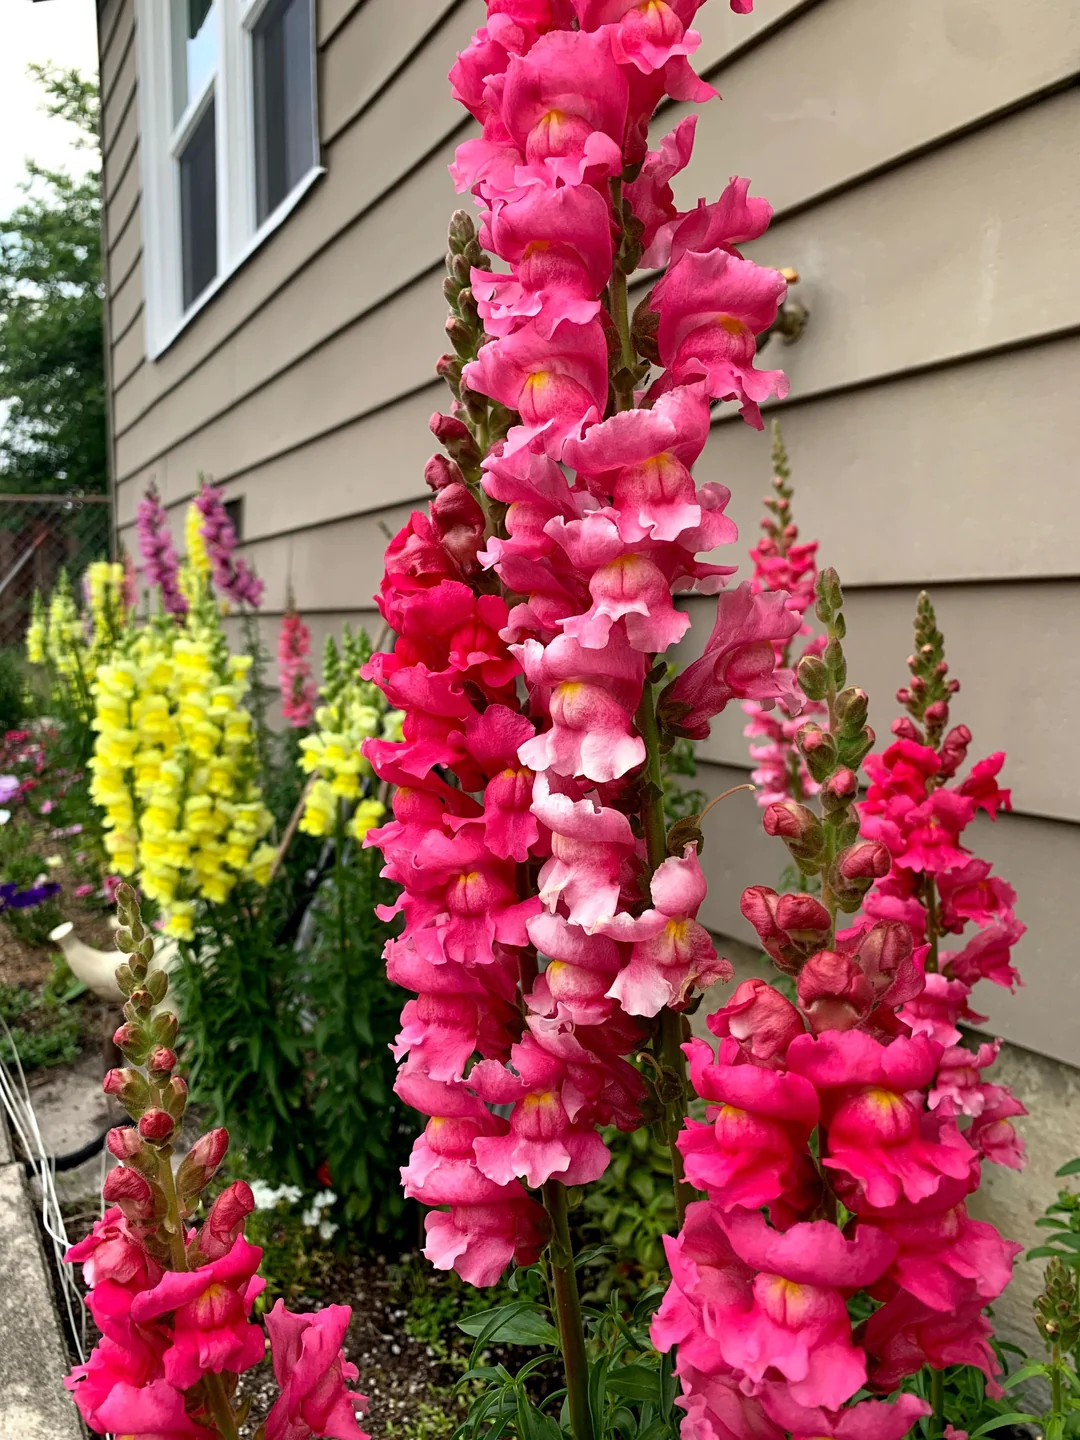 A group of pink and yellow Dragon Flowers in front of a house.